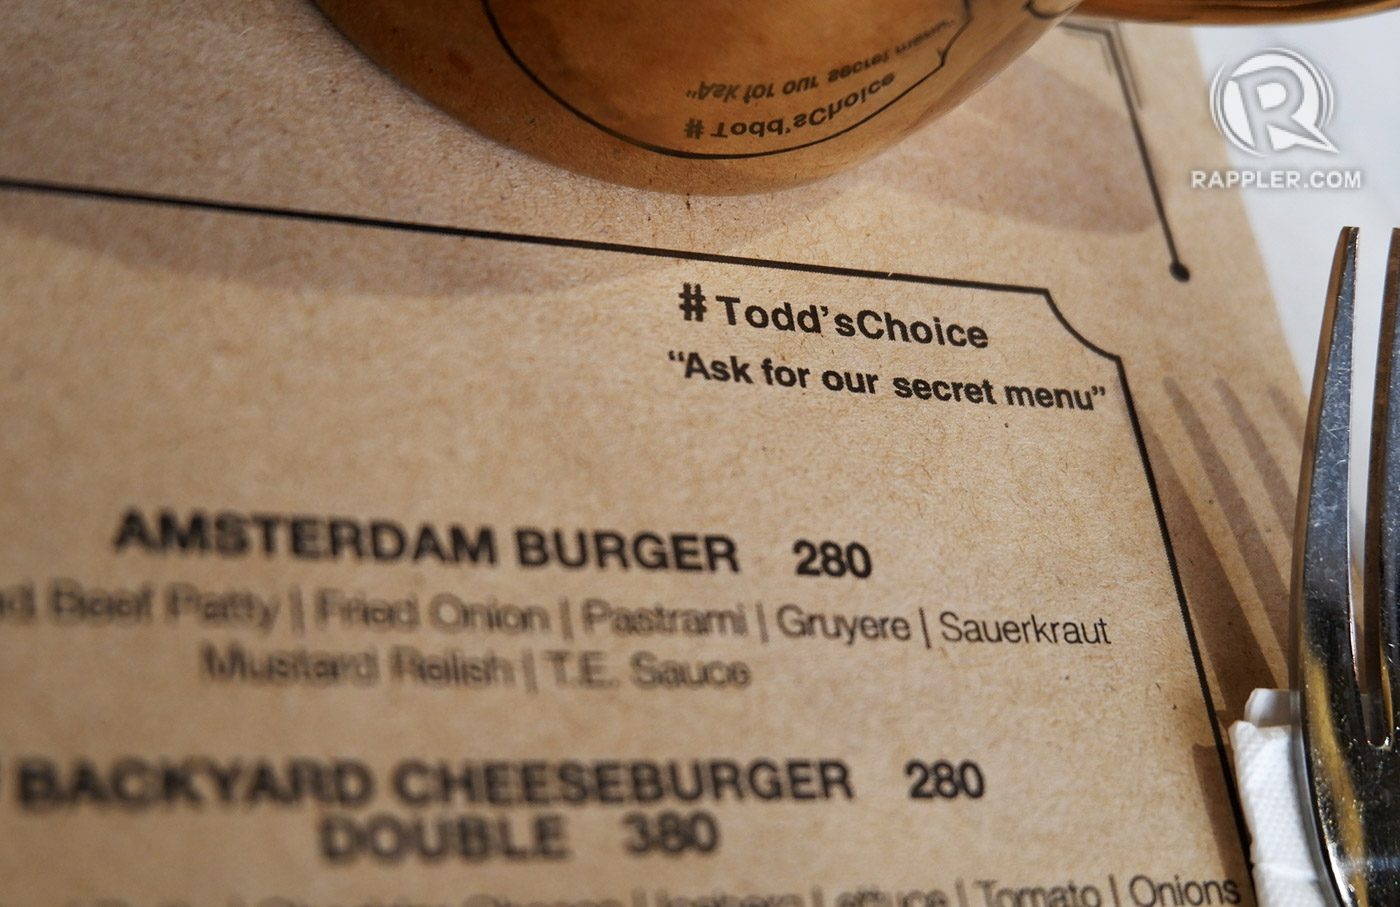 TAKE IT FROM TODD. Read the fine print and ask about the secret menu. 